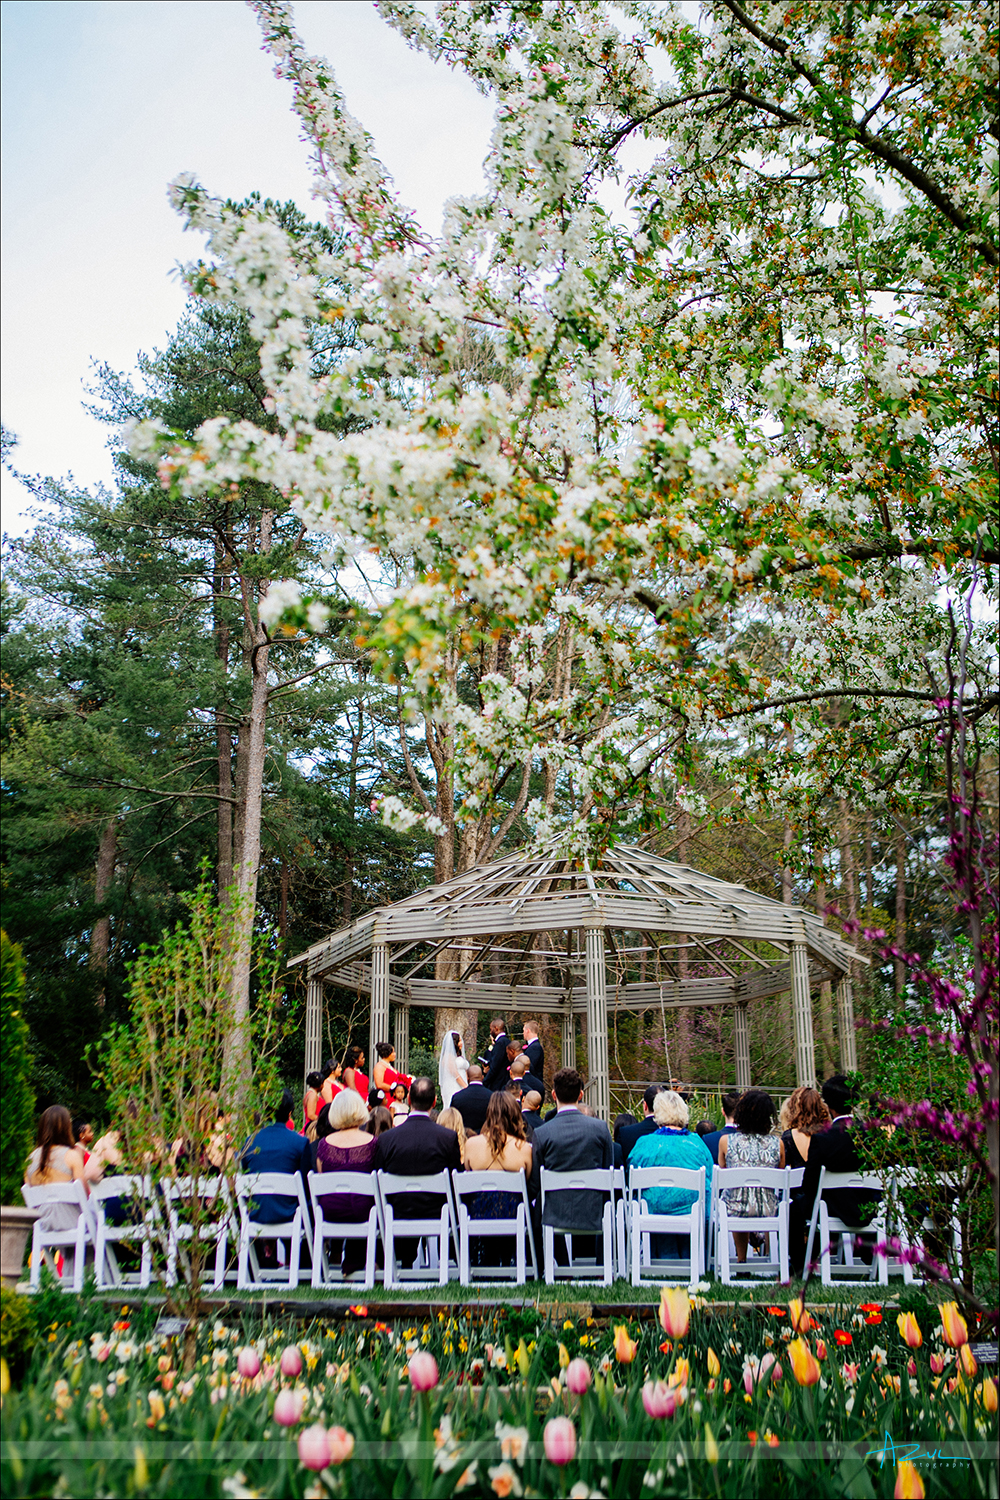 Beautiful wedding day flowers created by nature at Duke Gardens